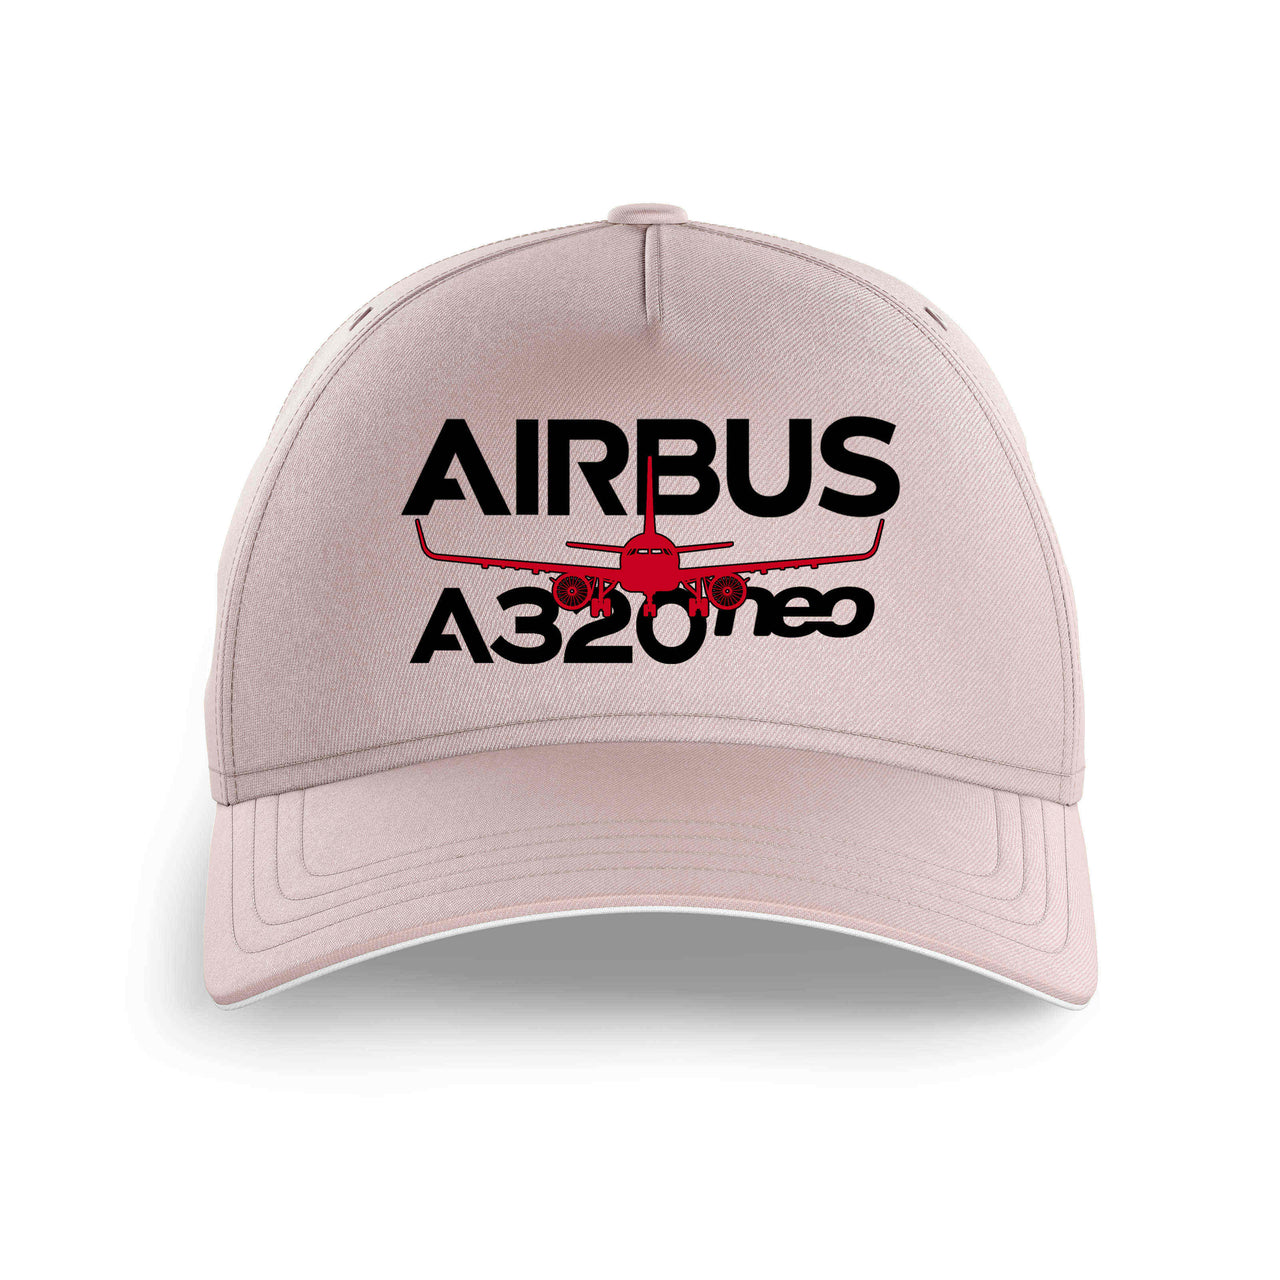 Amazing Airbus A320neo Printed Hats